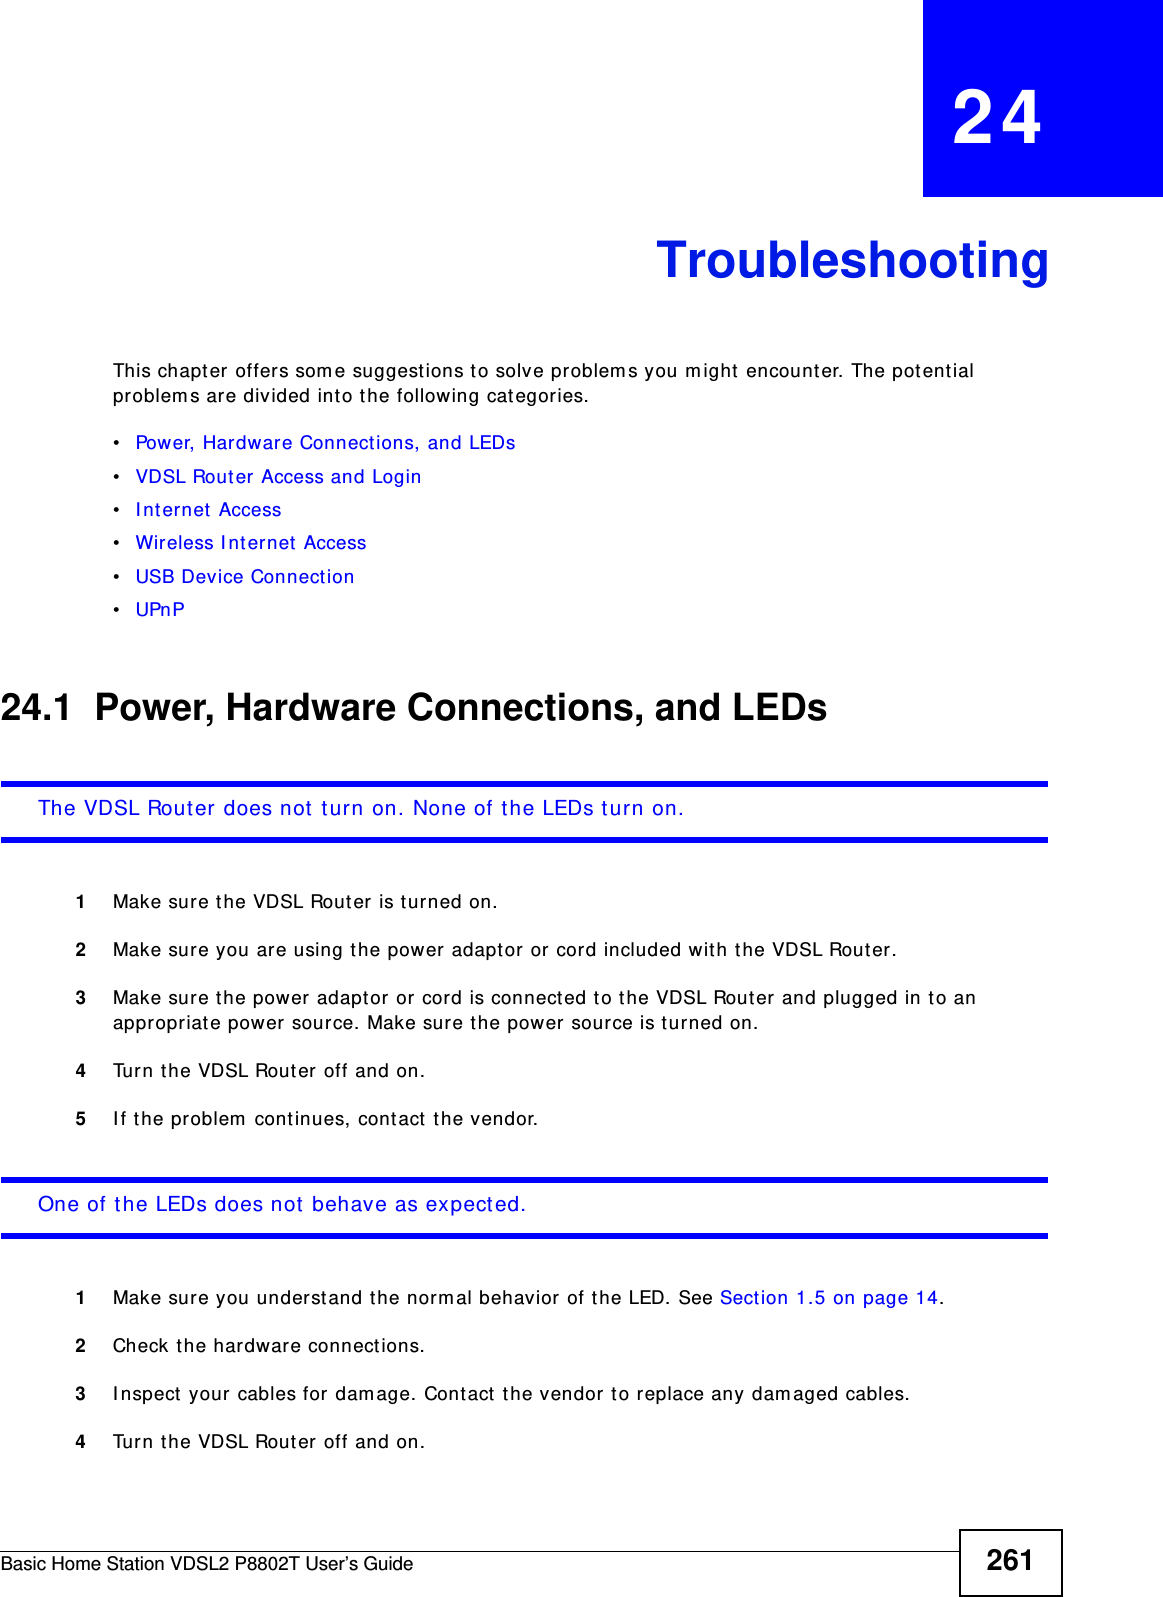 Basic Home Station VDSL2 P8802T User’s Guide 261CHAPTER   24TroubleshootingThis chapt er offers som e suggest ions t o solve problem s you m ight  encounter. The pot ent ial problem s are divided into t he following categories. •Power, Hardware Connect ions, and LEDs•VDSL Rout er  Access and Login•I nt ernet  Access•Wireless I nt ernet  Access•USB Device Connect ion•UPnP24.1  Power, Hardware Connections, and LEDsThe VDSL Rout er does not  t urn on. None of t he LEDs t urn on.1Make sure t he VDSL Rout er is turned on. 2Make sure you are using t he power adapt or or cord included wit h the VDSL Rout er.3Make sure the power adaptor or cor d is connect ed to the VDSL Router and plugged in t o an appropriate power source. Make sure the power source is t urned on.4Turn t he VDSL Router off and on.5I f the problem  continues, contact  the vendor.One of the LEDs does not behave as expected.1Make sure you underst and the norm al behavior of t he LED. See Sect ion 1.5 on page 14.2Check the hardware connections.3I nspect your cables for dam age. Contact the vendor to replace any dam aged cables.4Turn t he VDSL Router off and on.